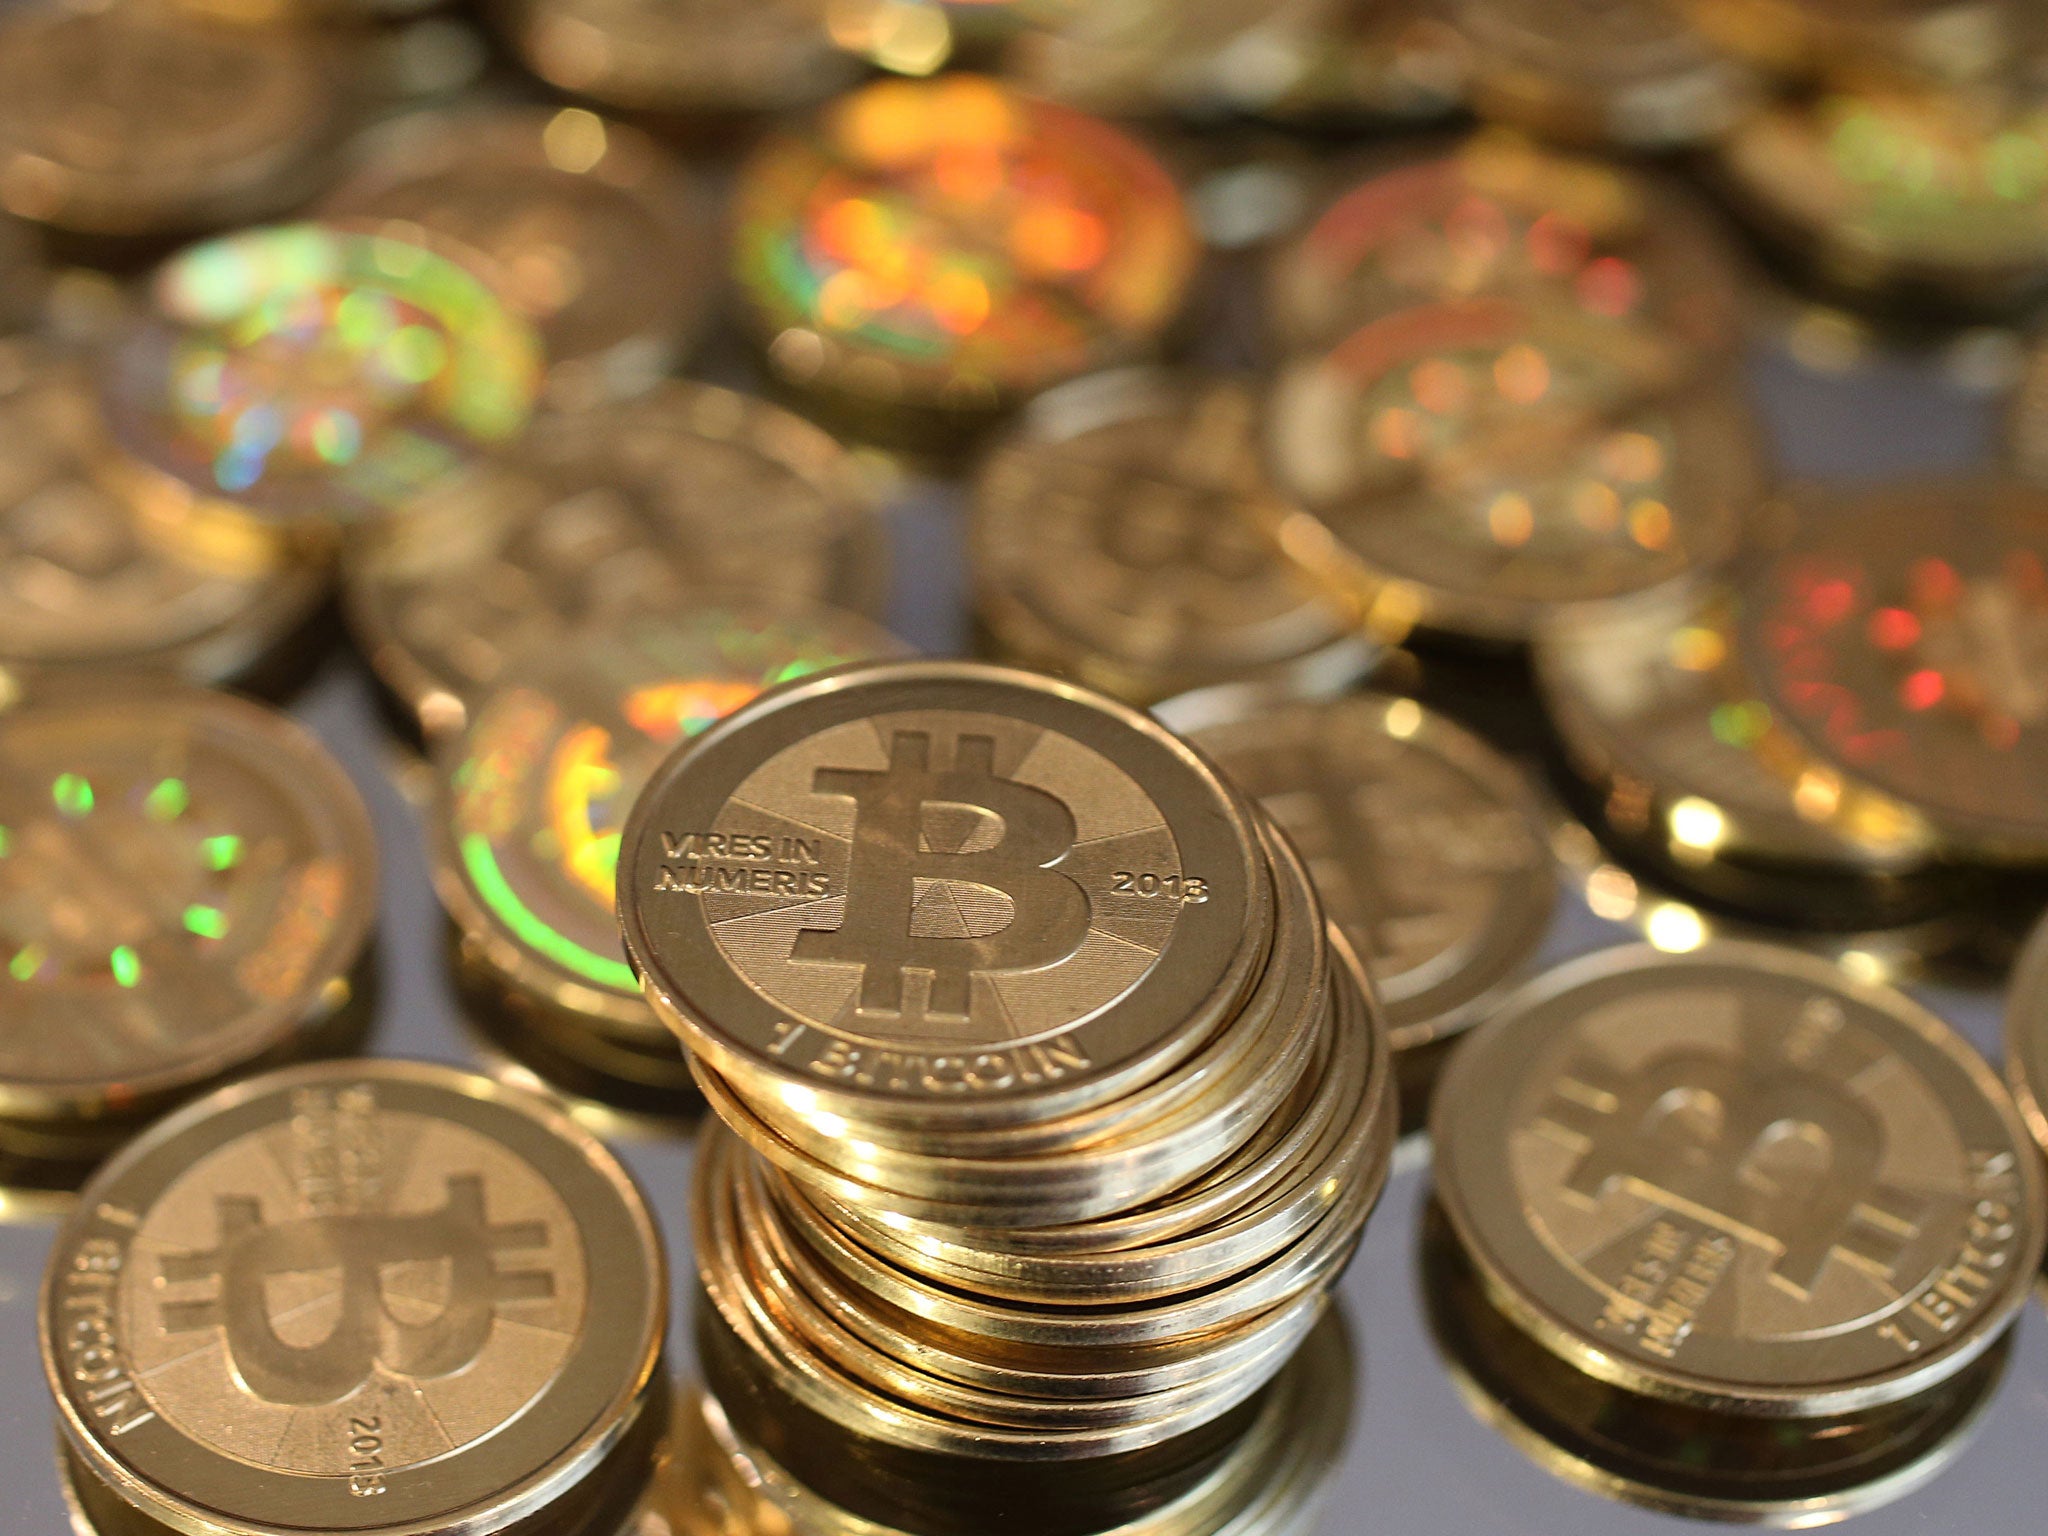 A leading hedge fund manager says Bitcoin might be more than a fad and could be worth investing in